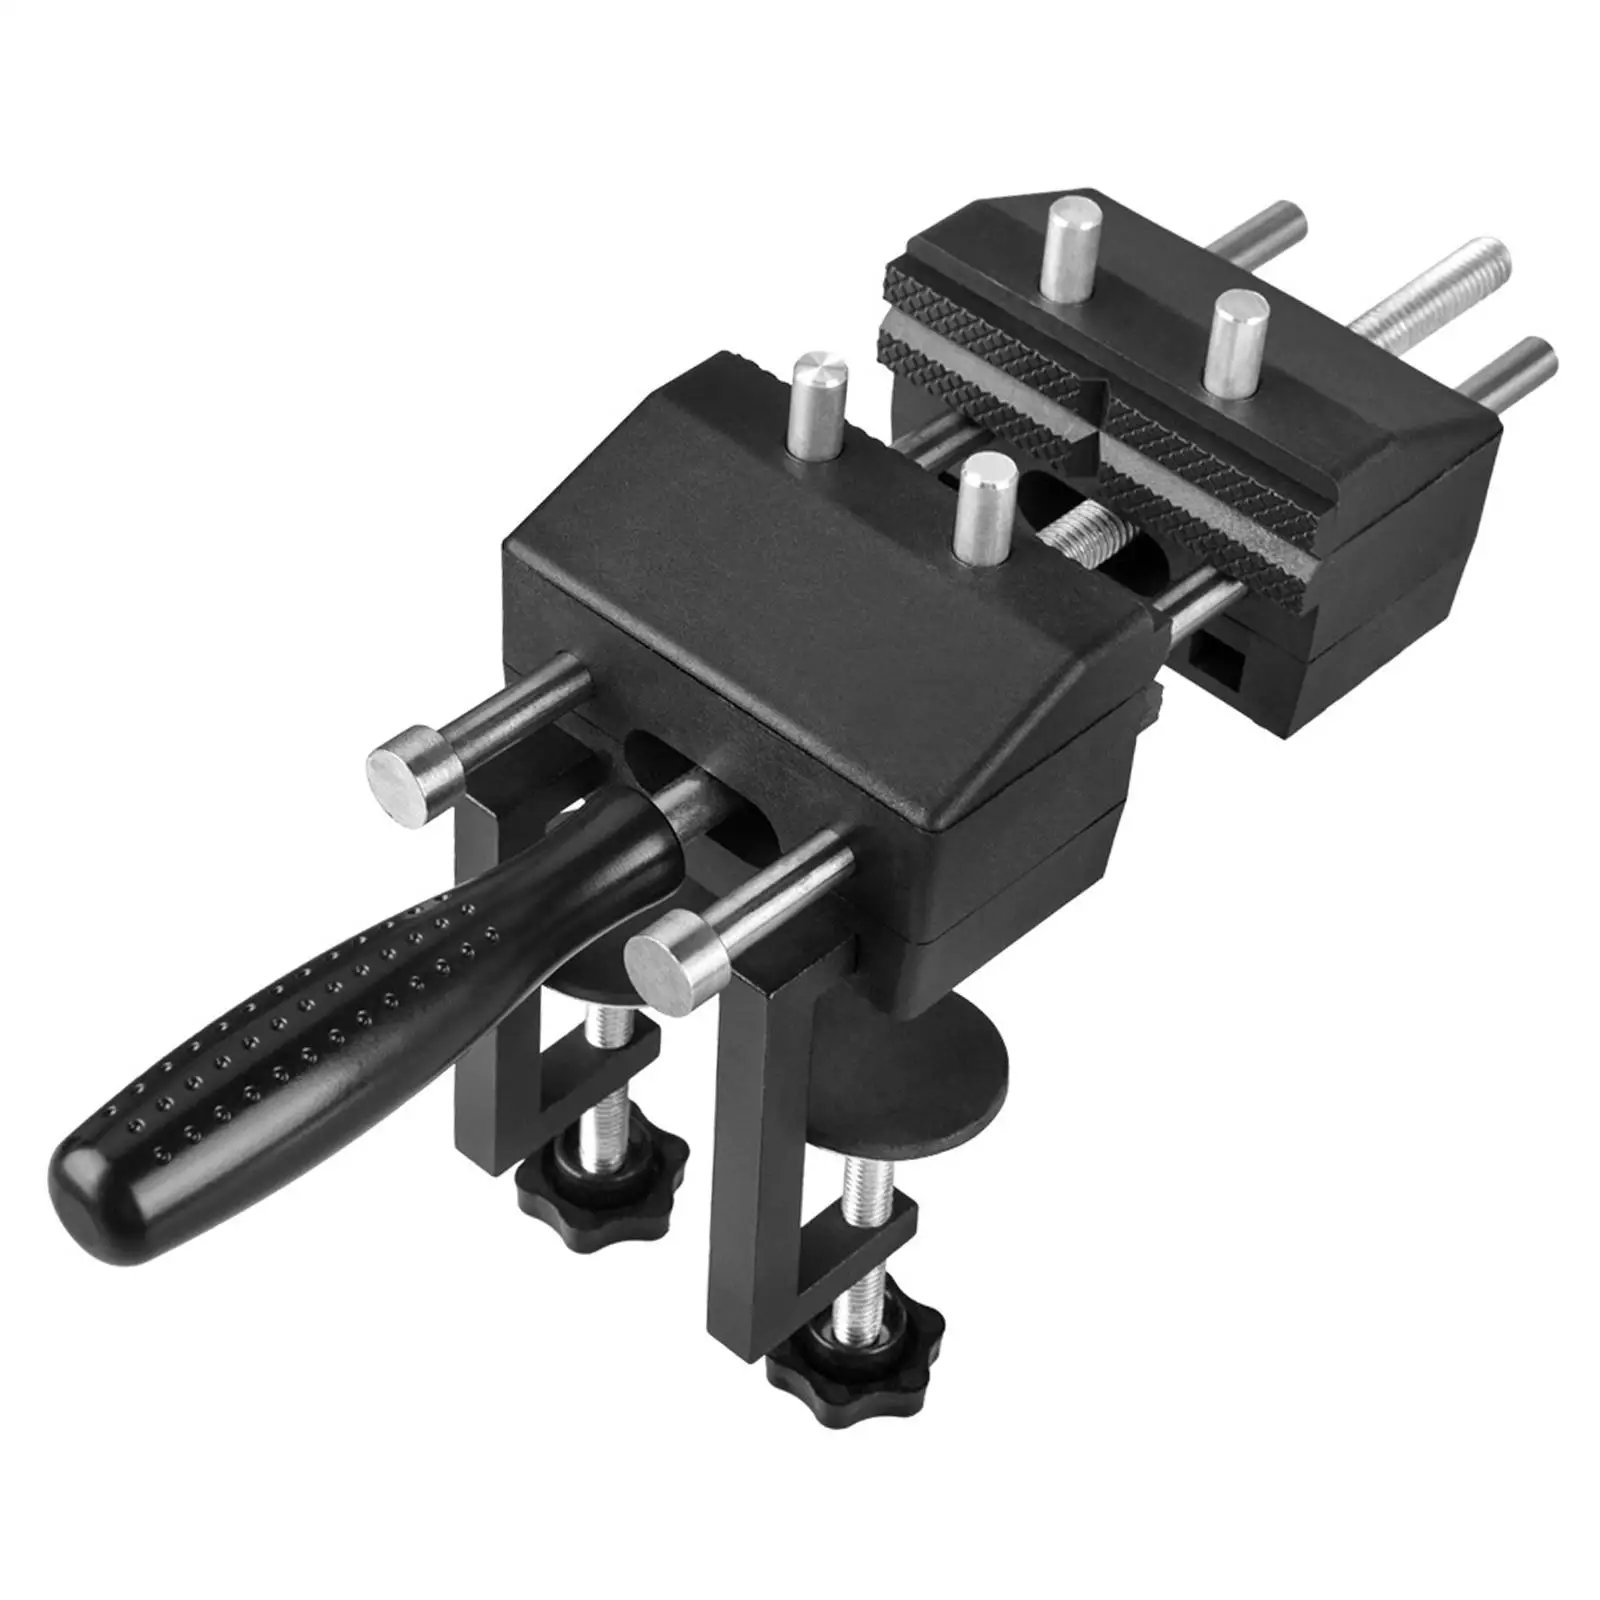 Table Vice Clamp Quick Adjustment with Swivel Bench Vise Clamp for Woodworking Drilling Sawing Workbench Accessories